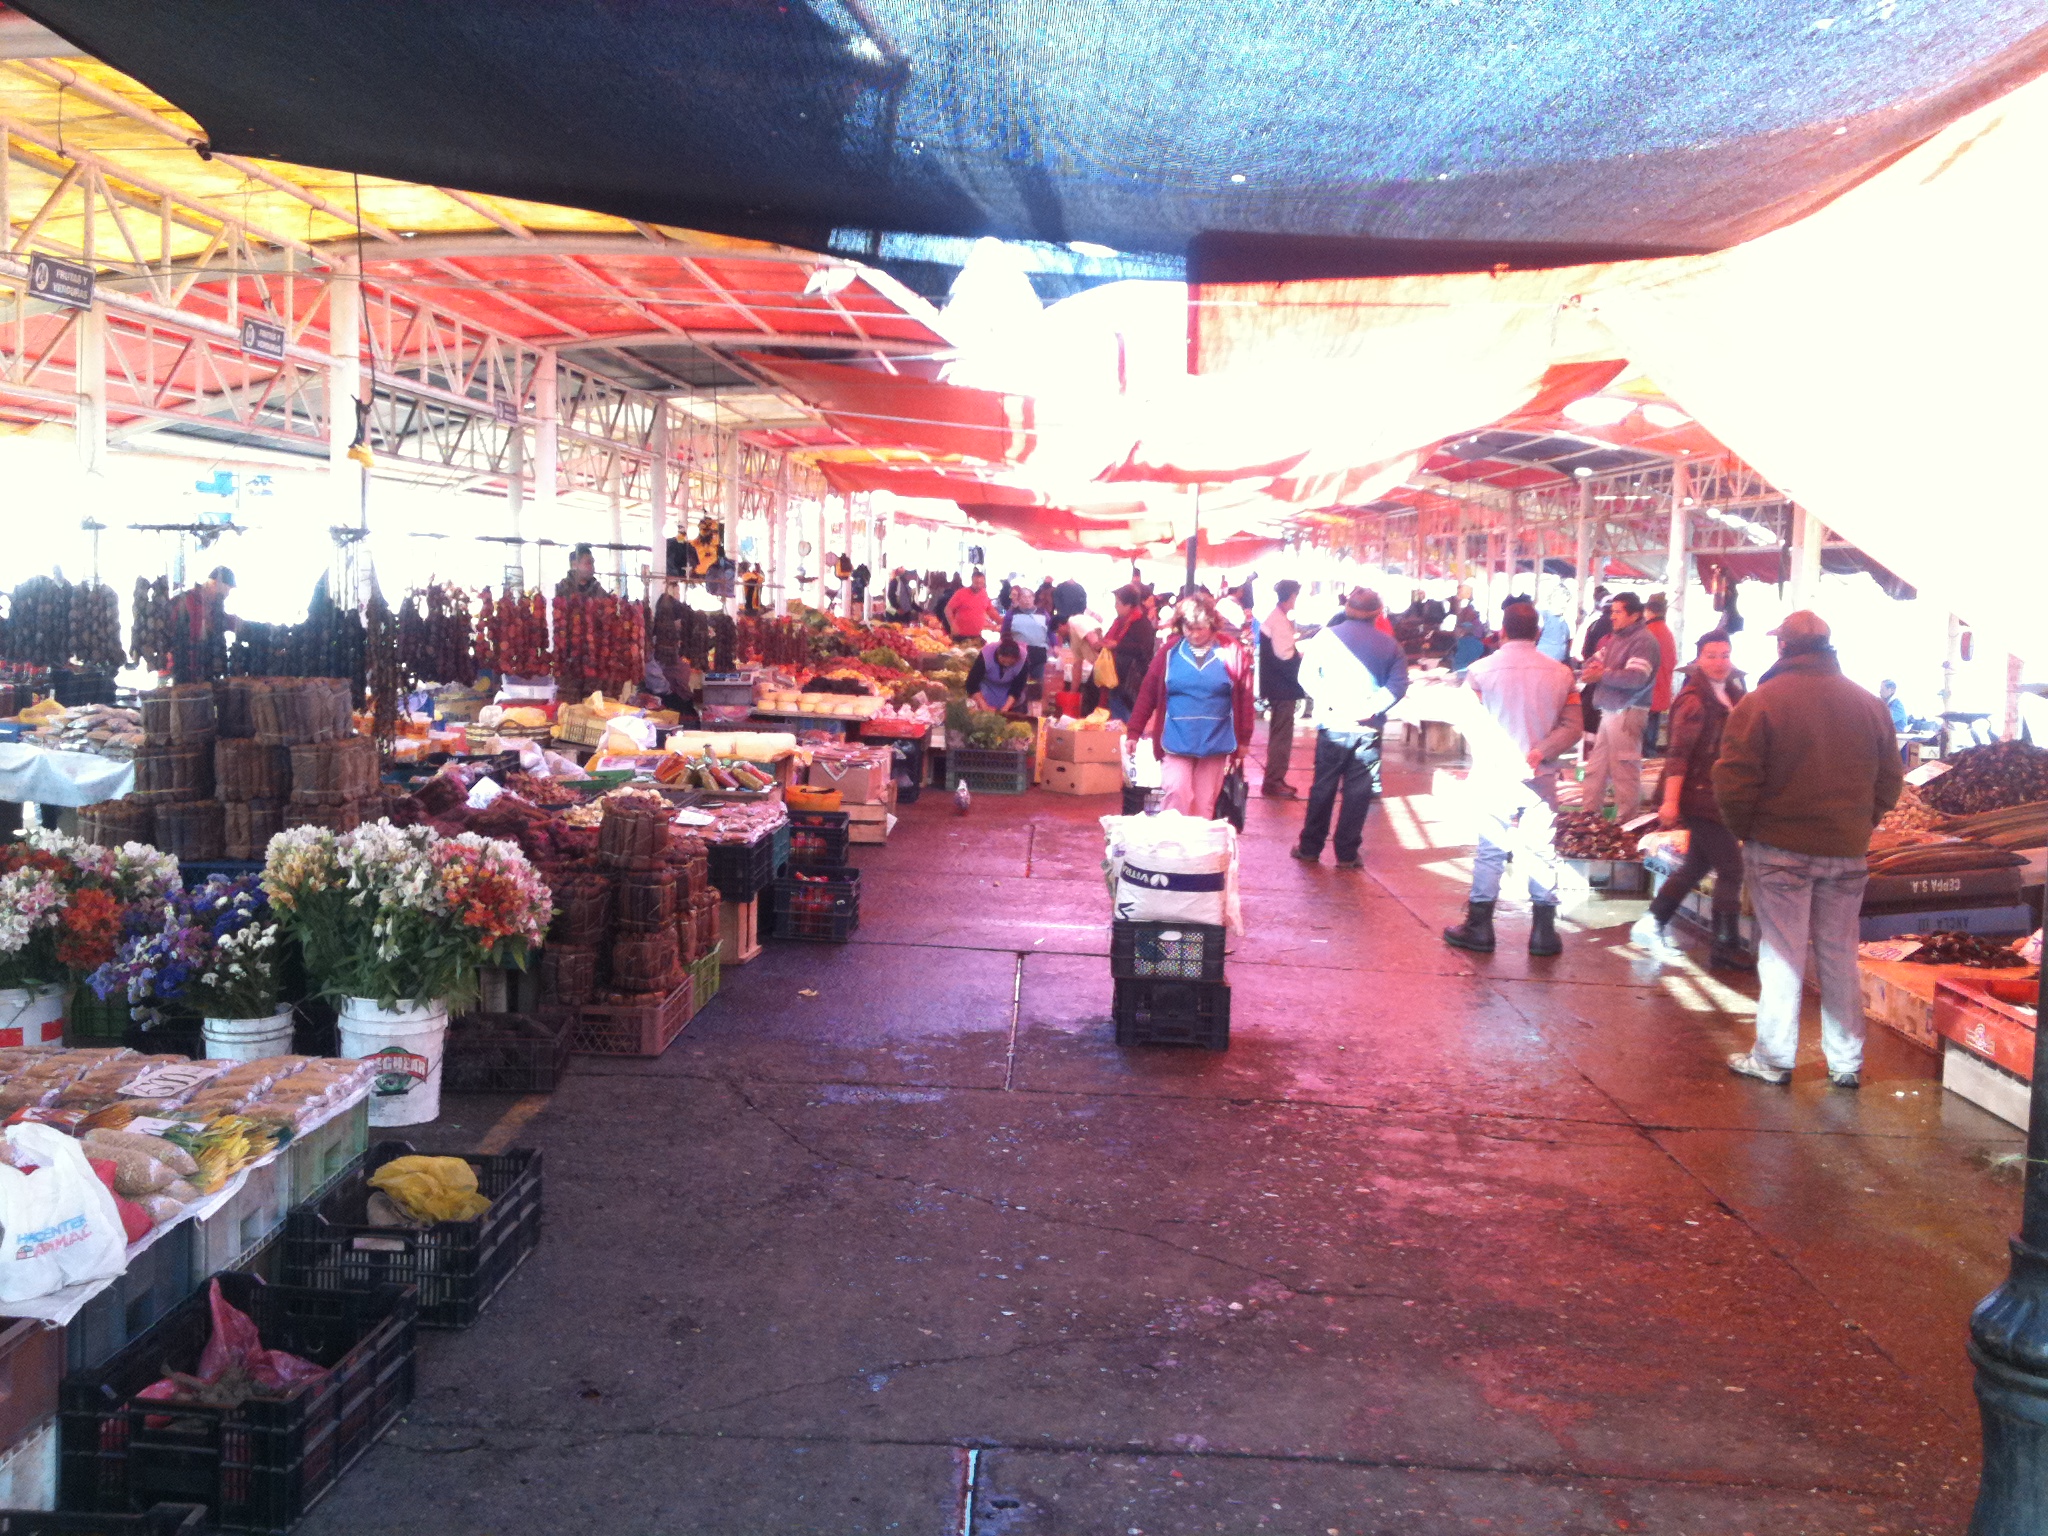 market area with umbrellas and flower stand